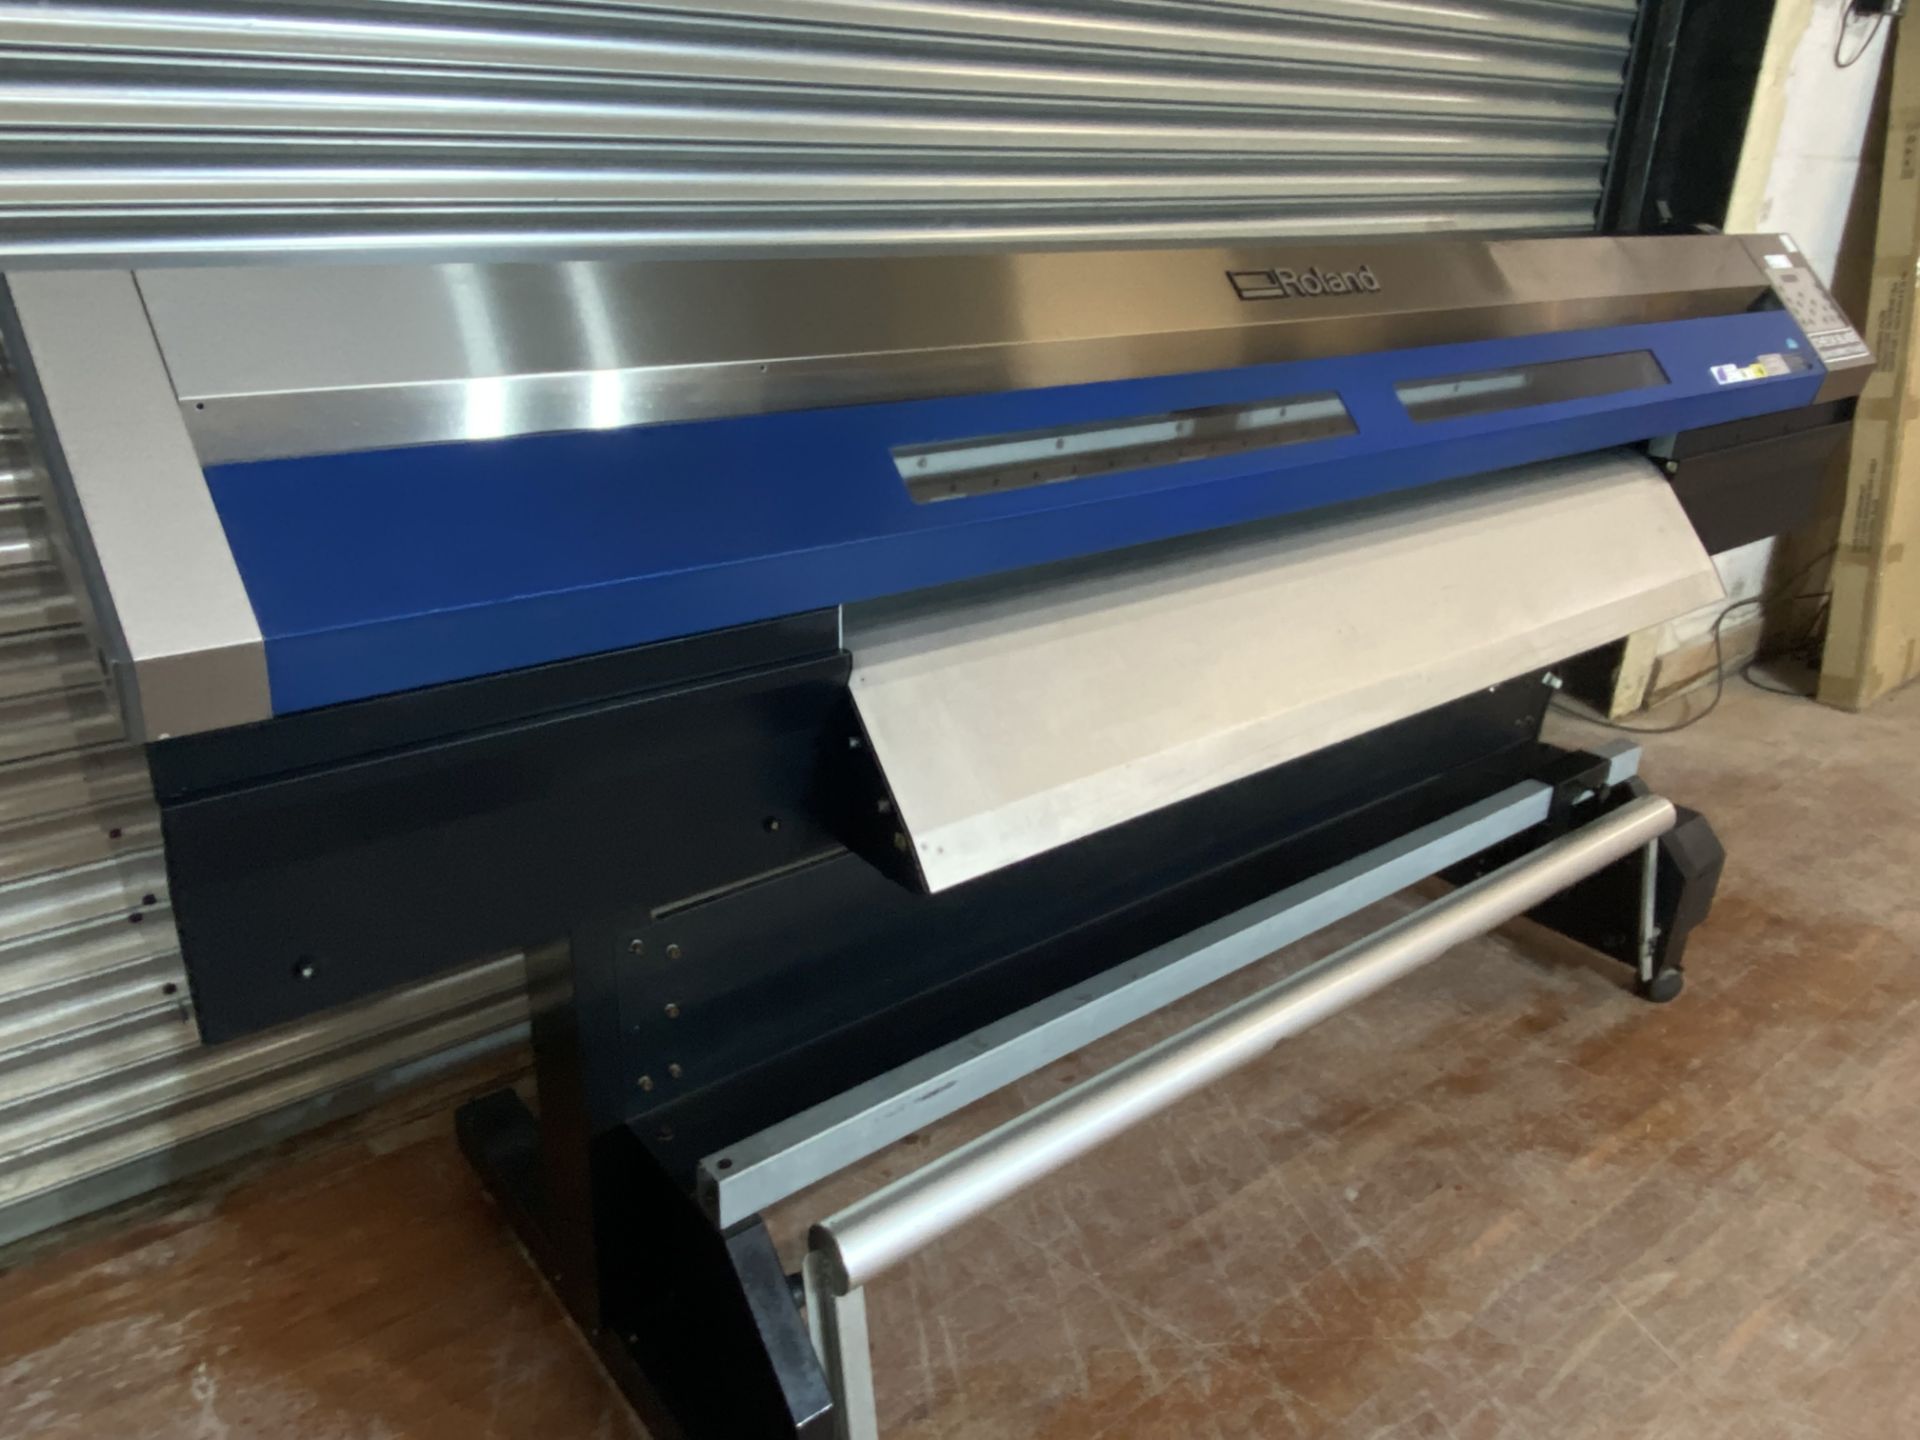 ROLAND XC-540 ECO SOLVENT PRINT AND CUT LARGE FORMAT PRINTER (R9) - Image 3 of 3